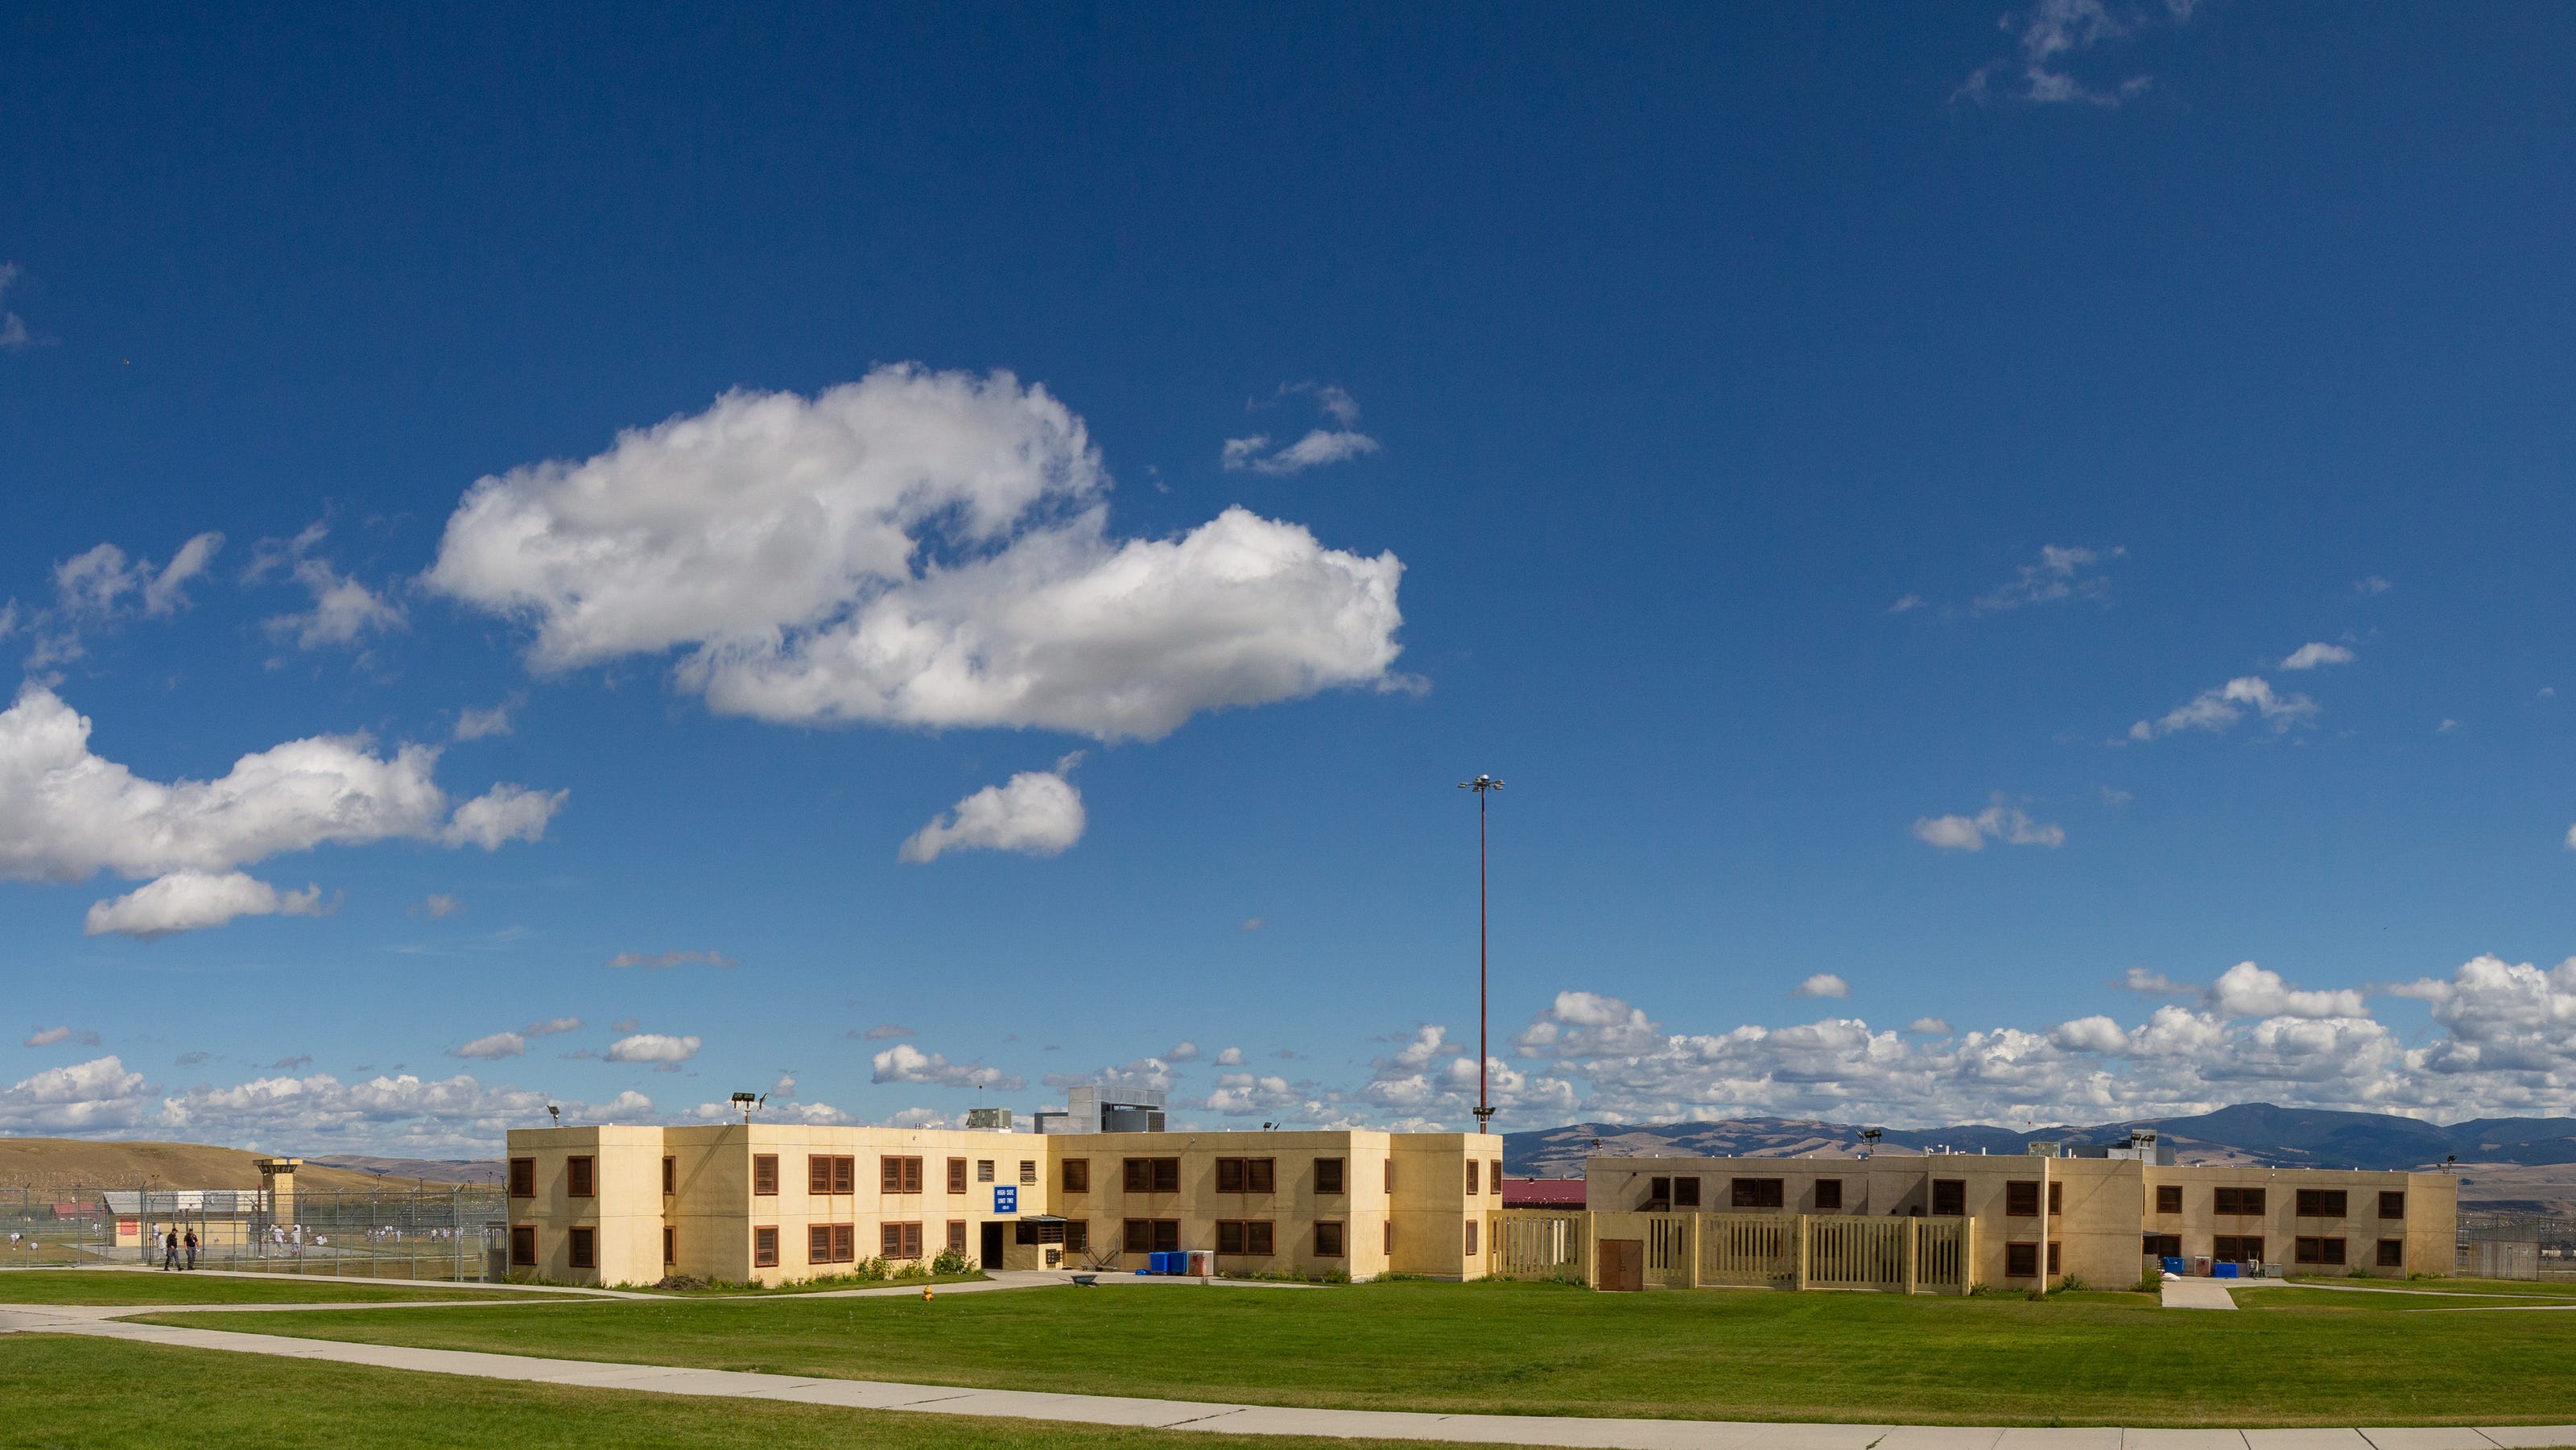 Montana State Prison in need of repairs